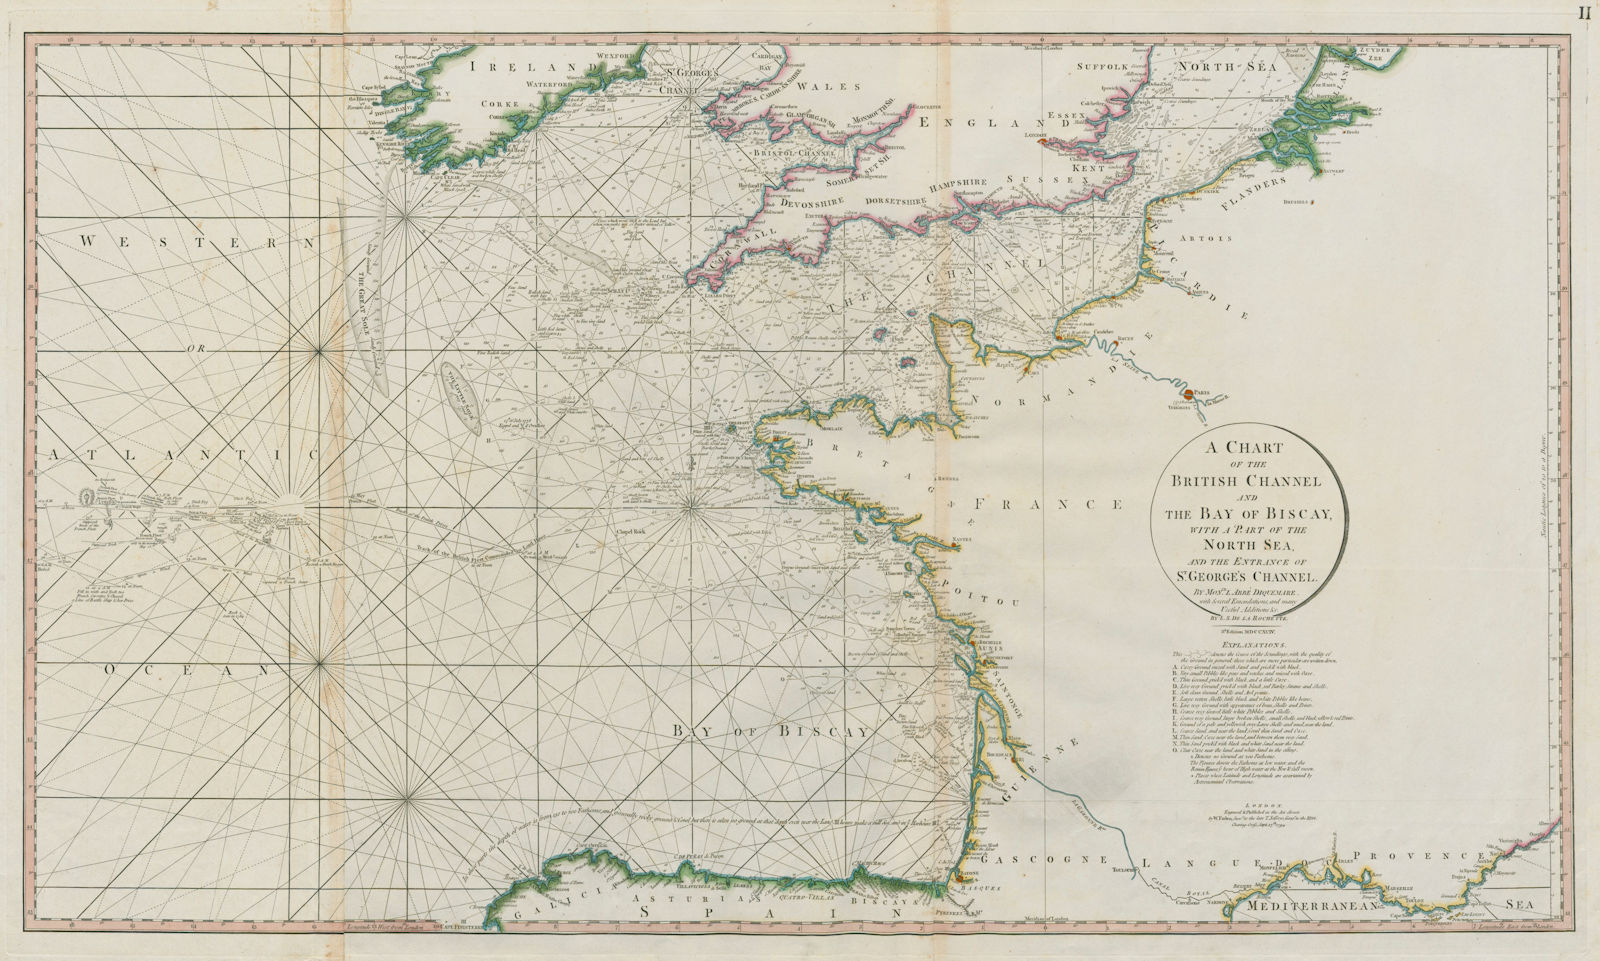 Associate Product A chart of the British Channel & the Bay of Biscay… FADEN /DELAROCHETTE 1794 map